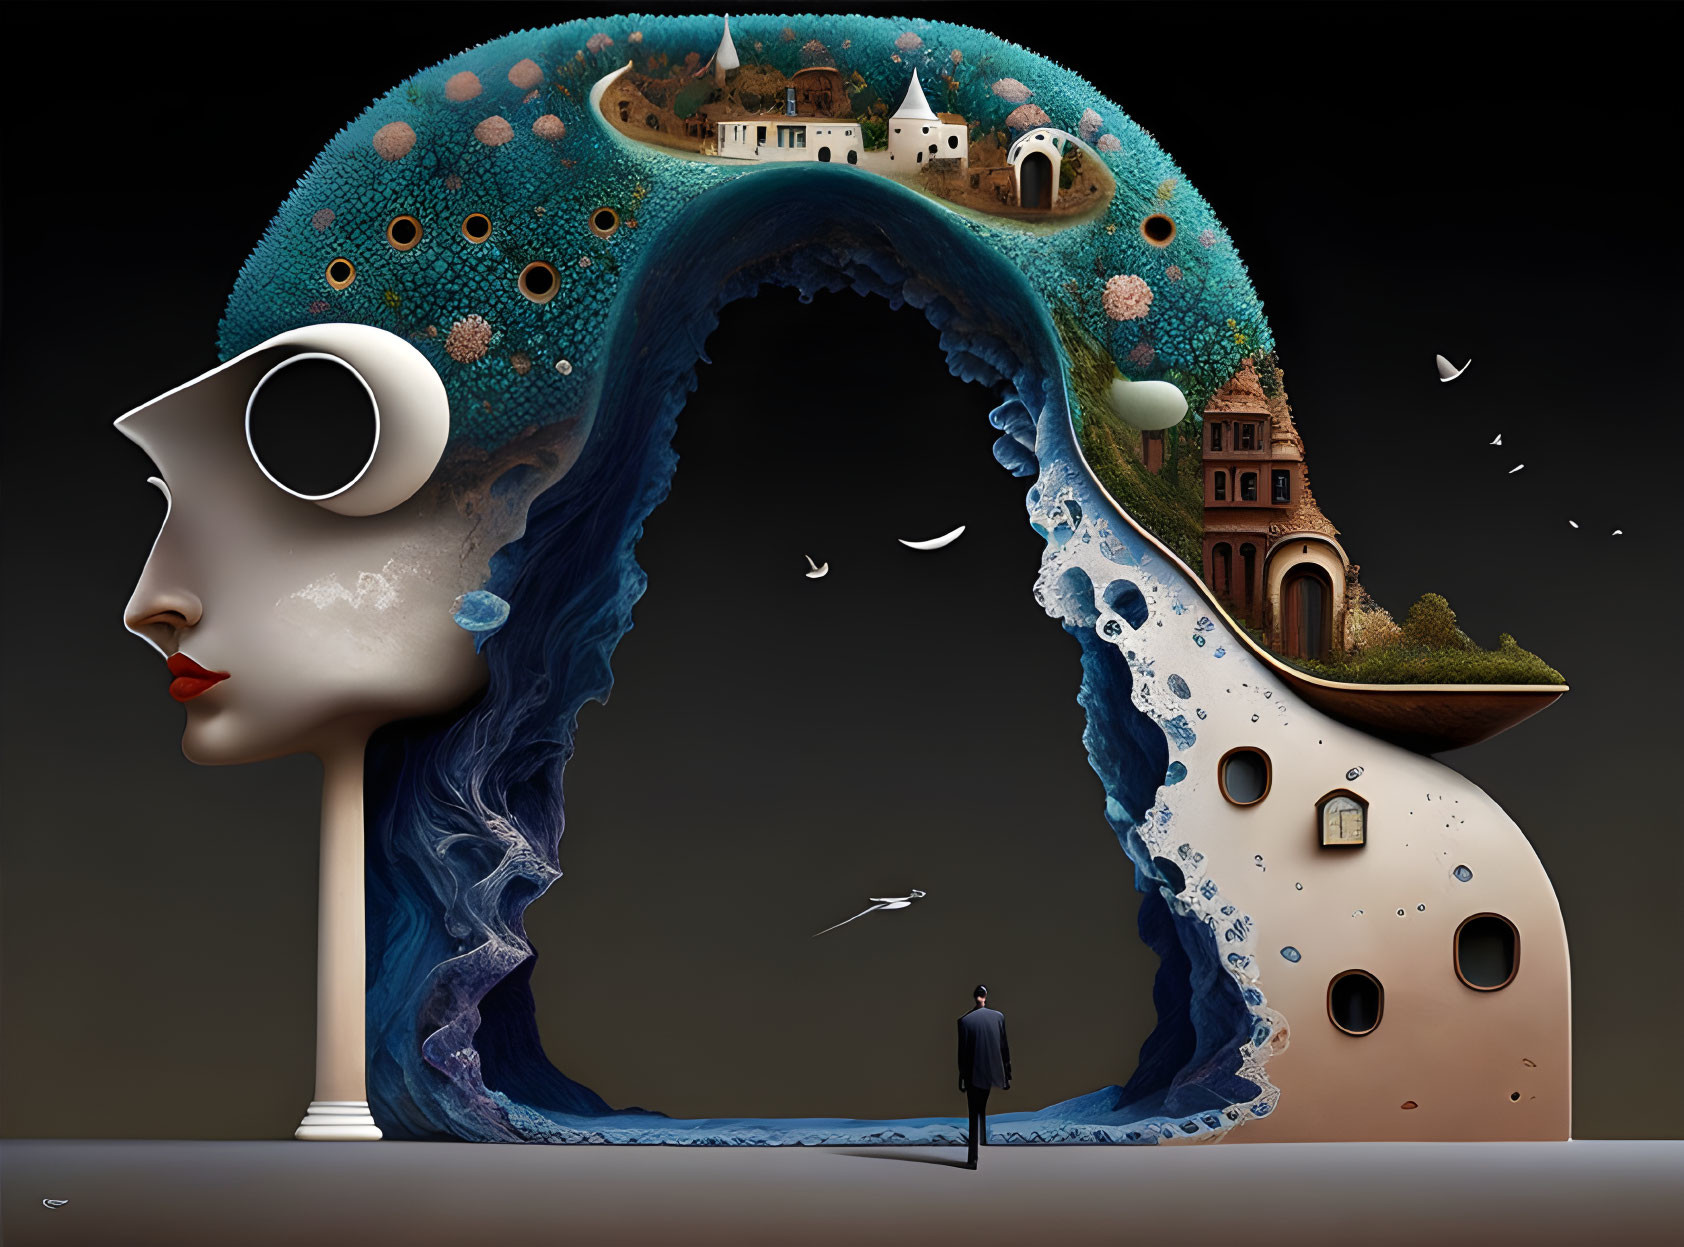 Surreal artwork: Woman's profile with ecosystem and architecture, nature blending with human form